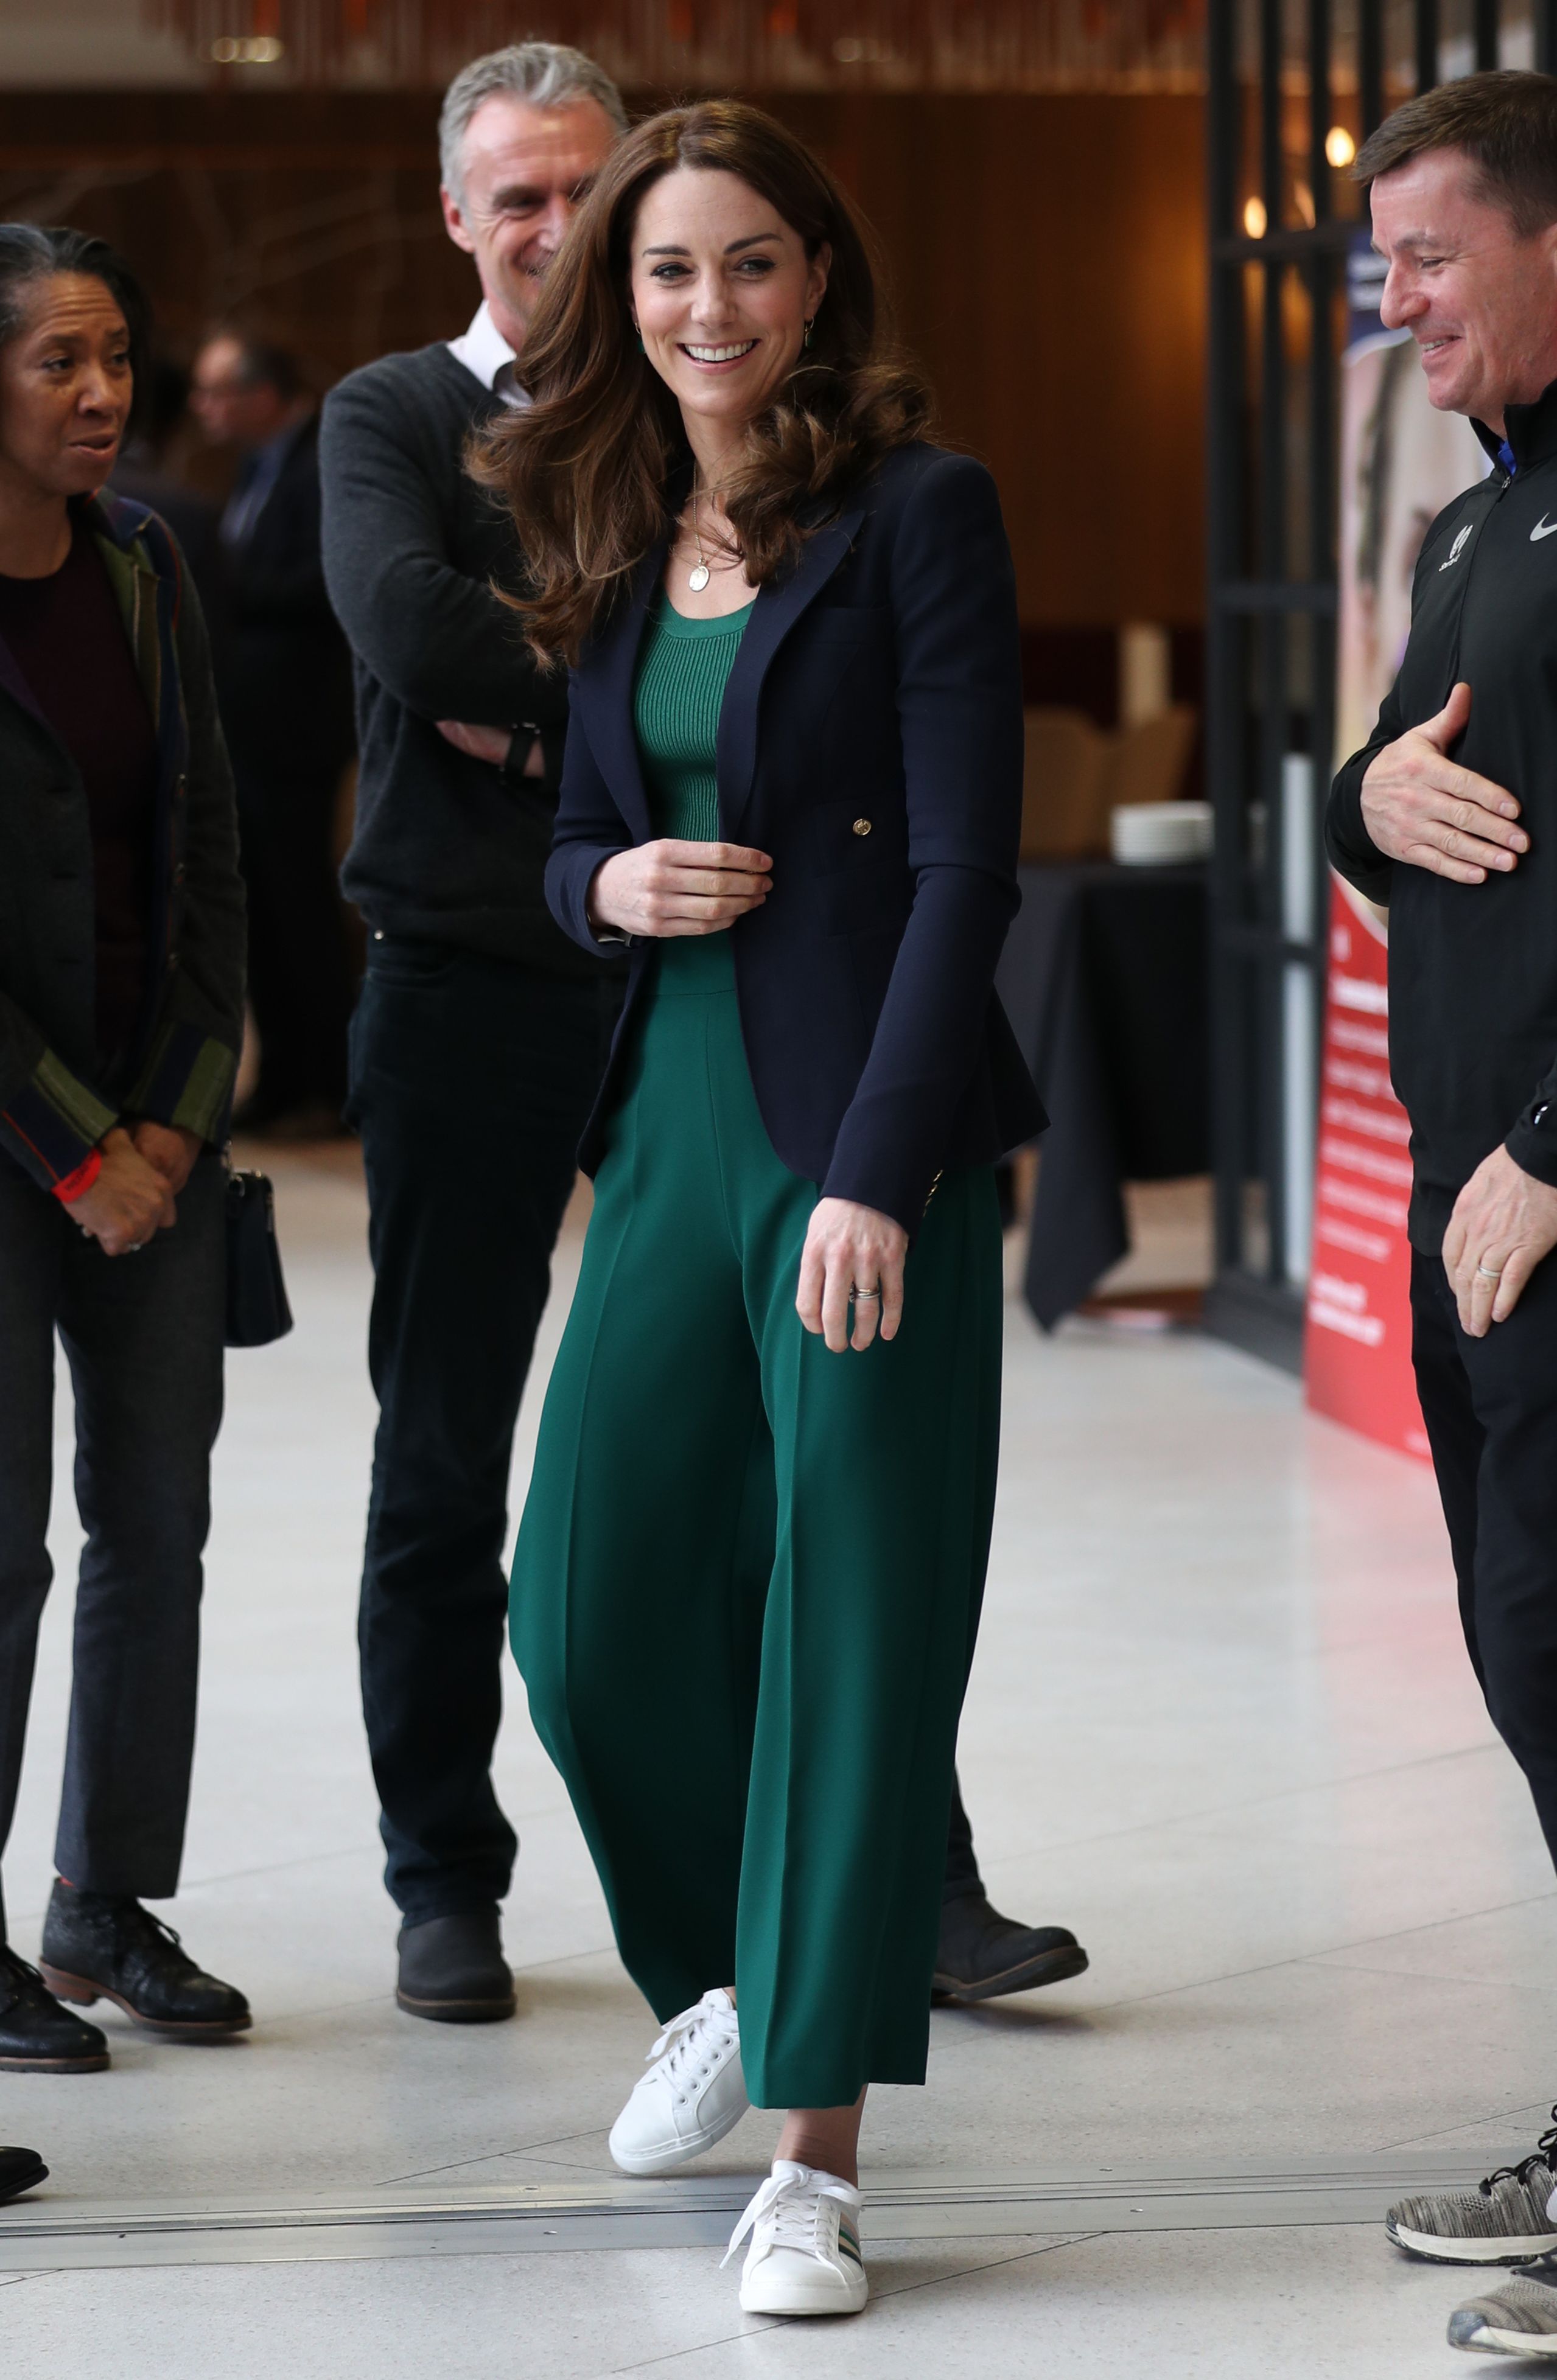 kate middleton business casual